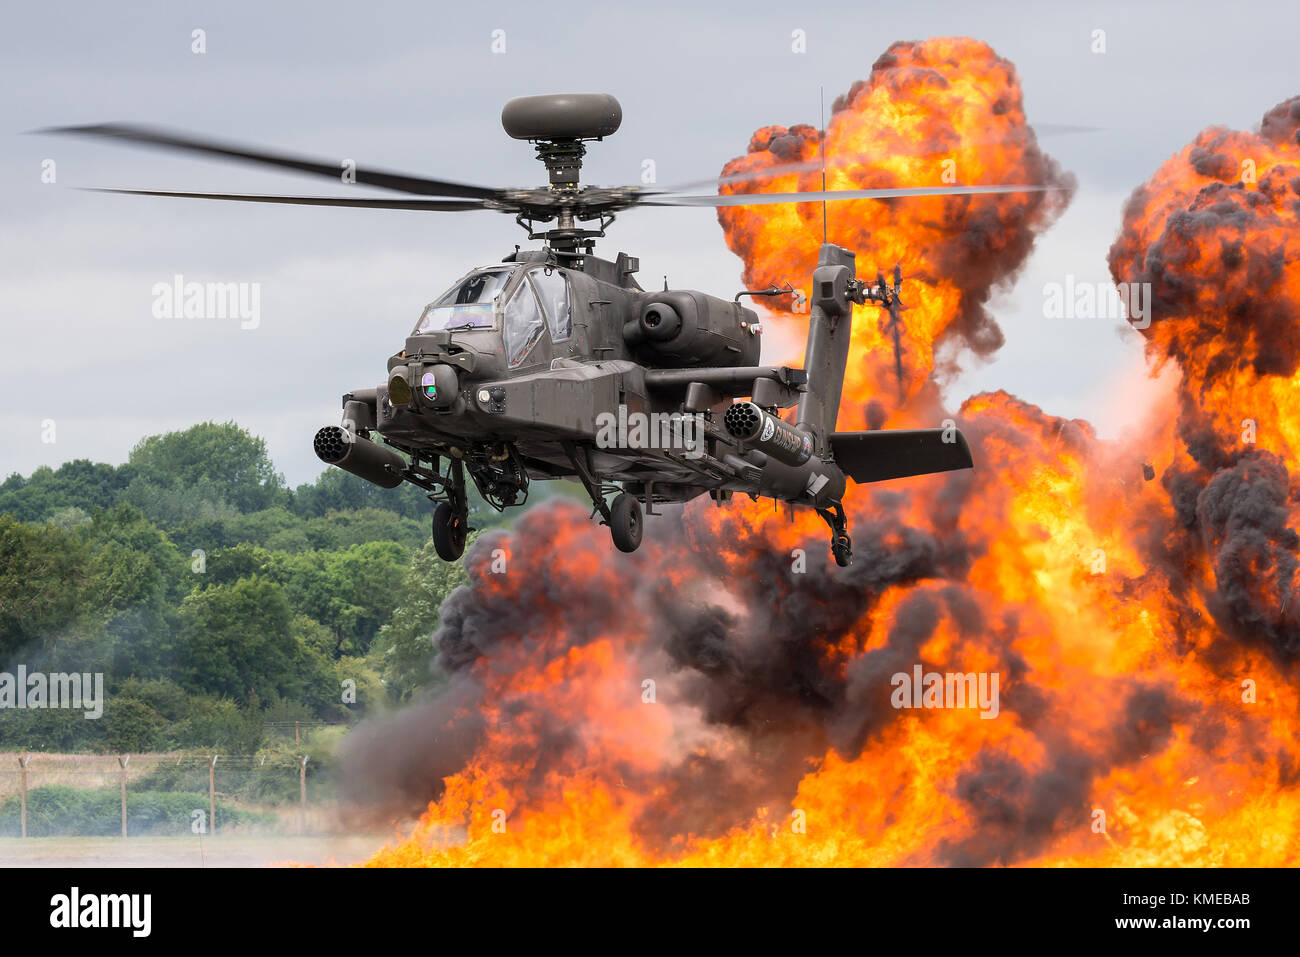 An Apache attack helicopter of the British Army Air Corps. Stock Photo